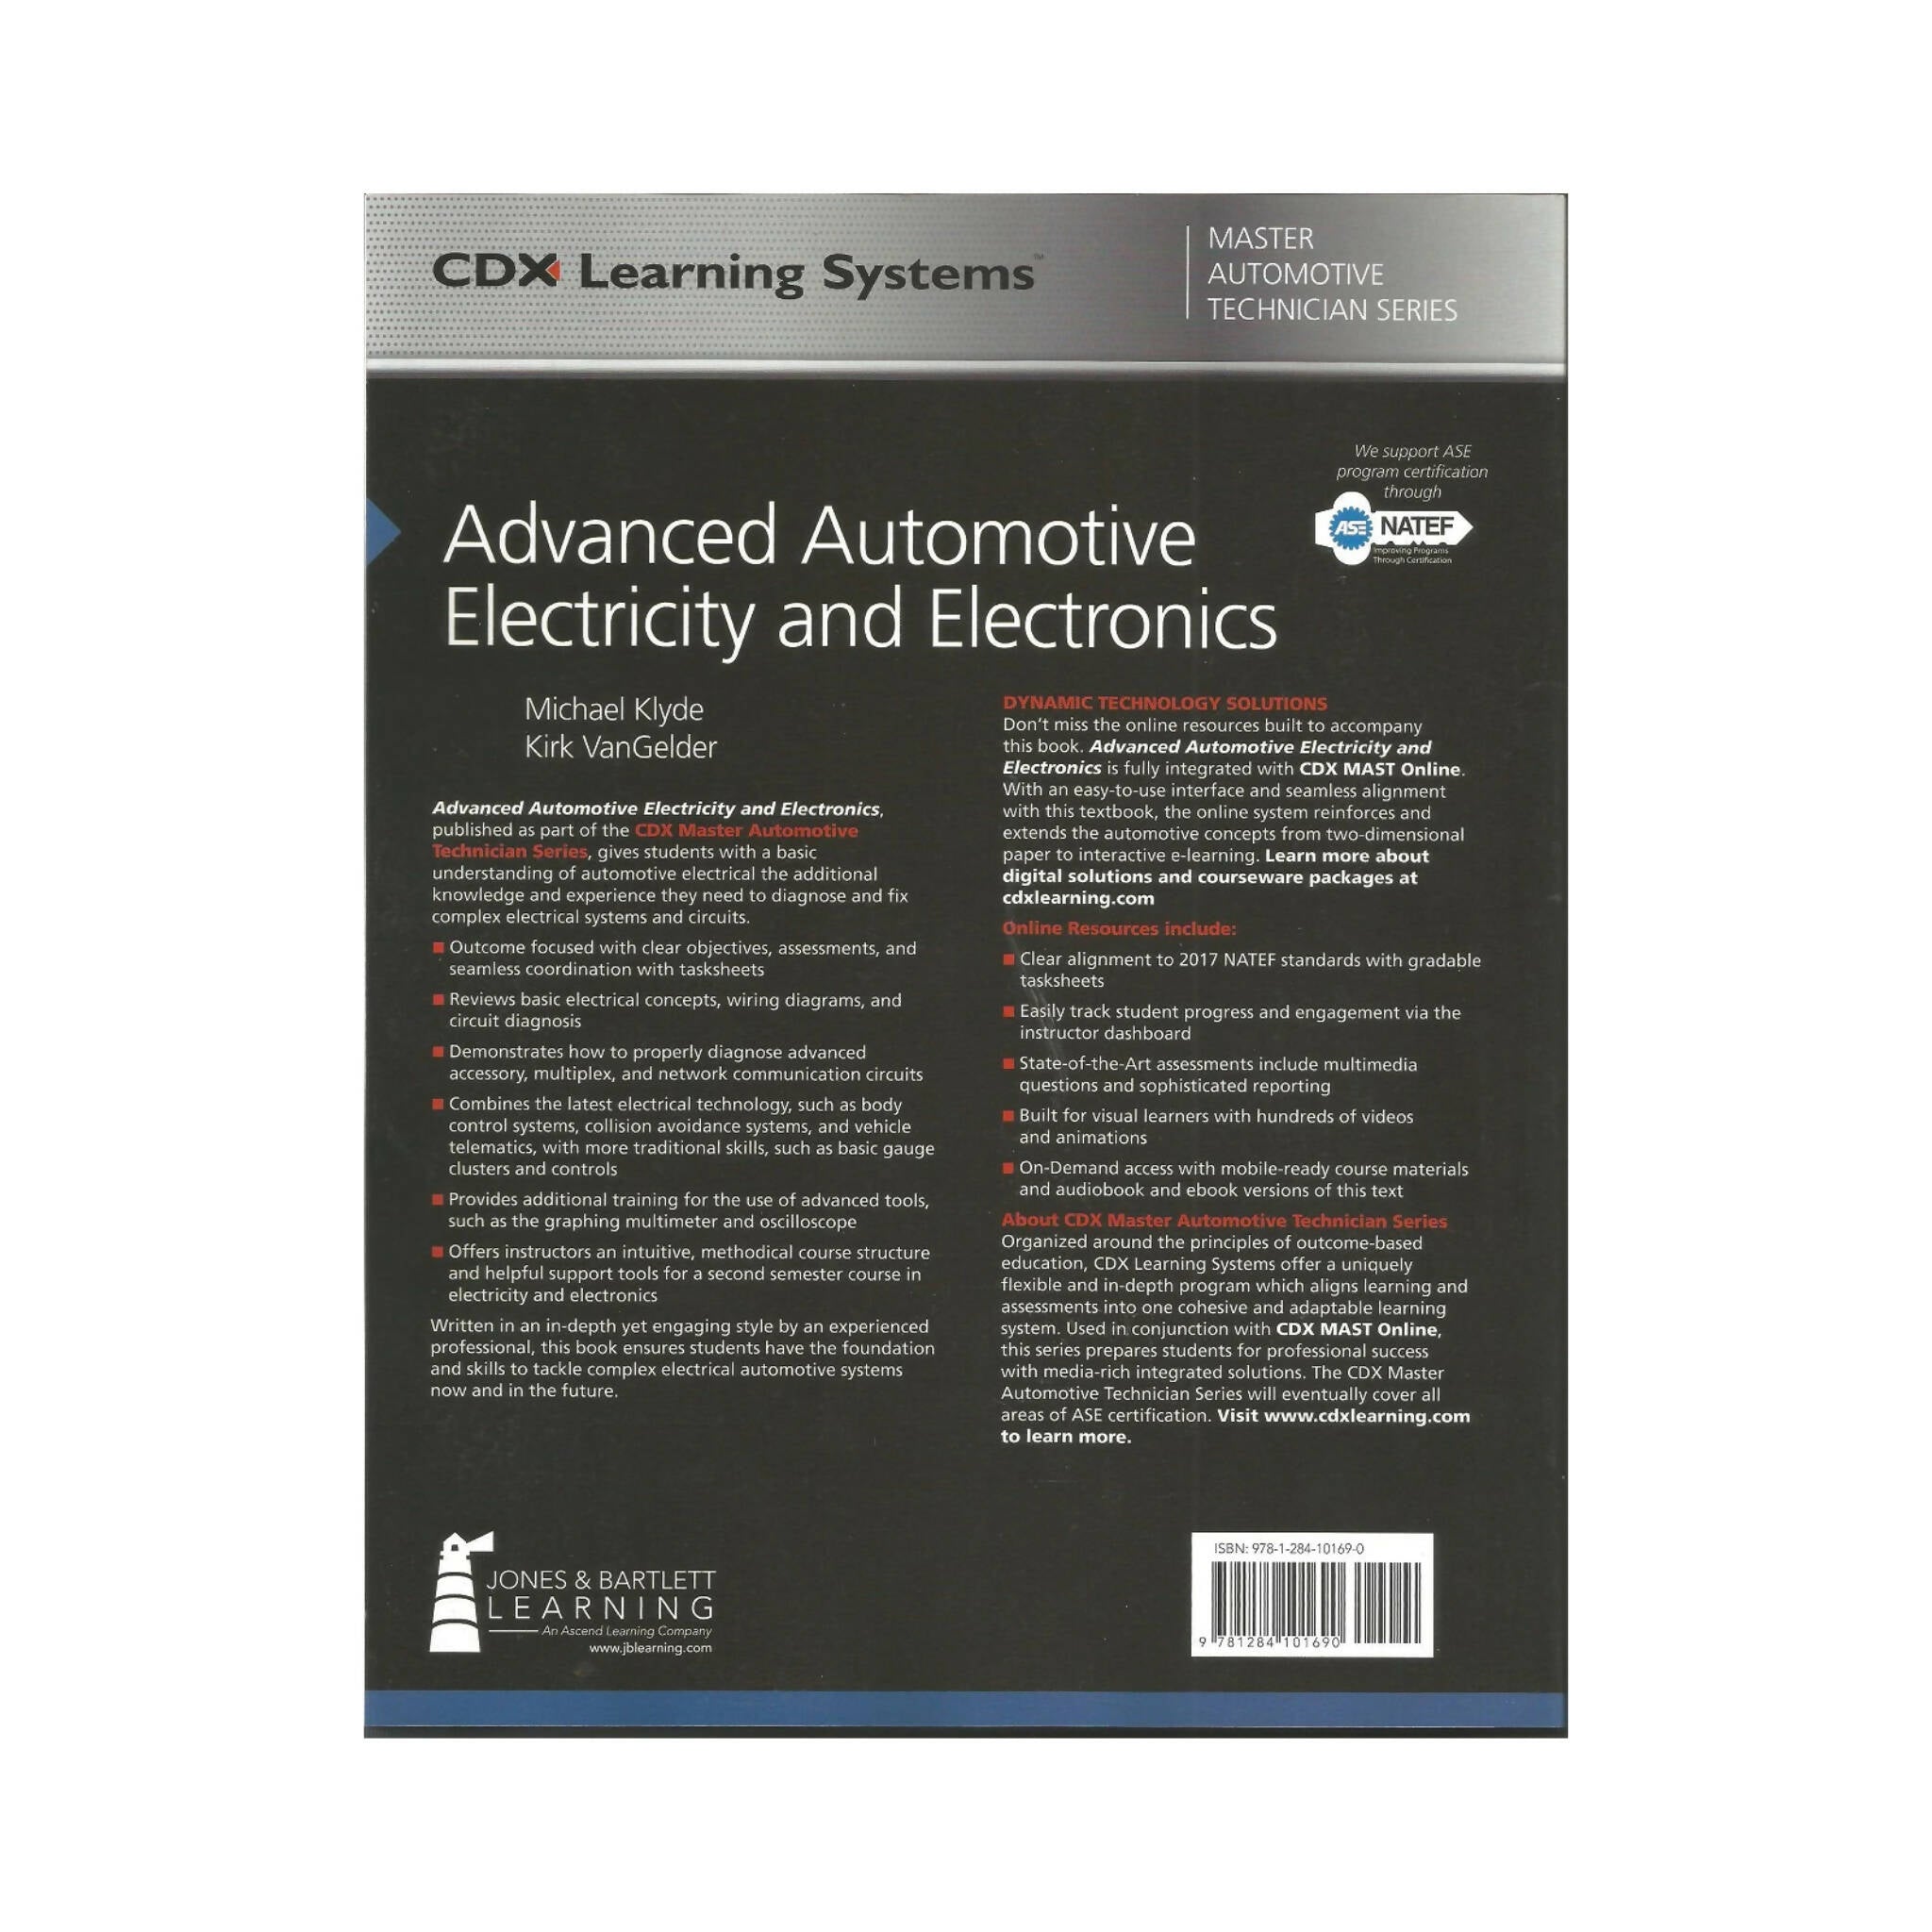 Book, Advanced Automotive Electricity and Electronics, (Cdx Learning Systems Master Automotive Technician)